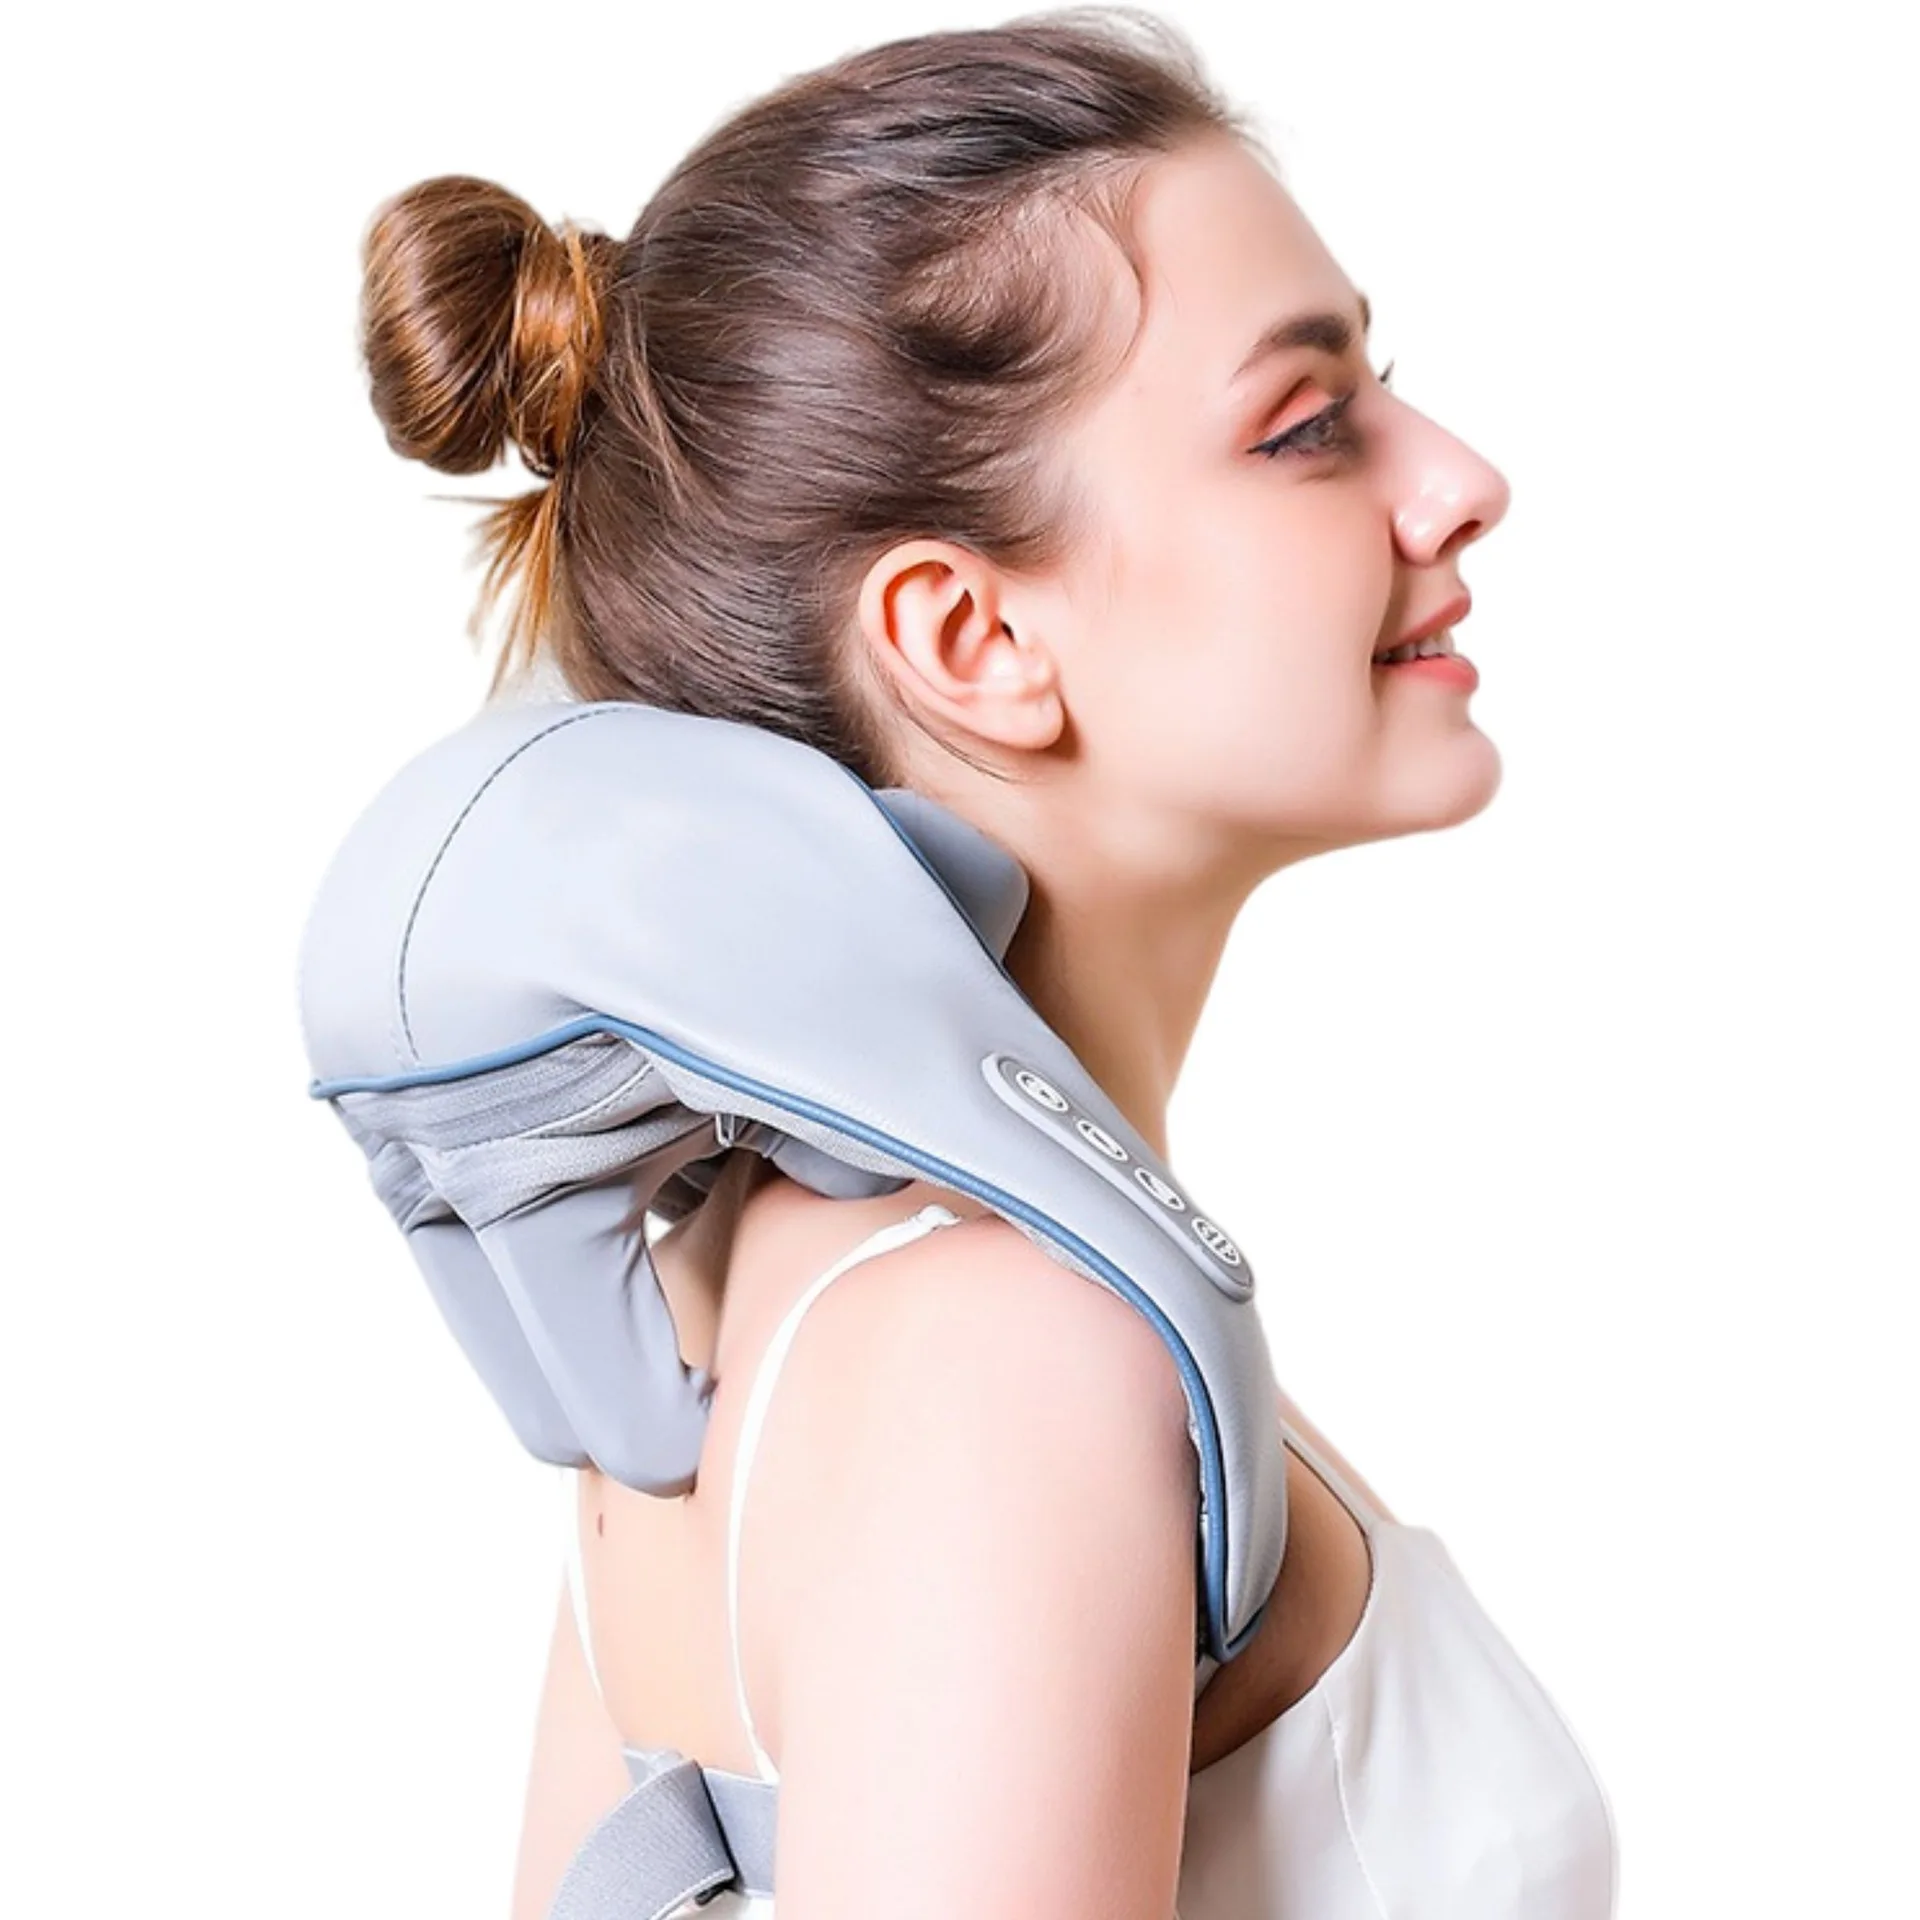 https://ae01.alicdn.com/kf/S0f35bab01ee943228e95e3e9fffb3bcdy/Neck-Massager-For-Pain-Relief-Rechargeable-Trapezius-Muscle-Kneading-Shoulder-Cervical-Spine-Multifunction-Body-Home-Massagers.jpg